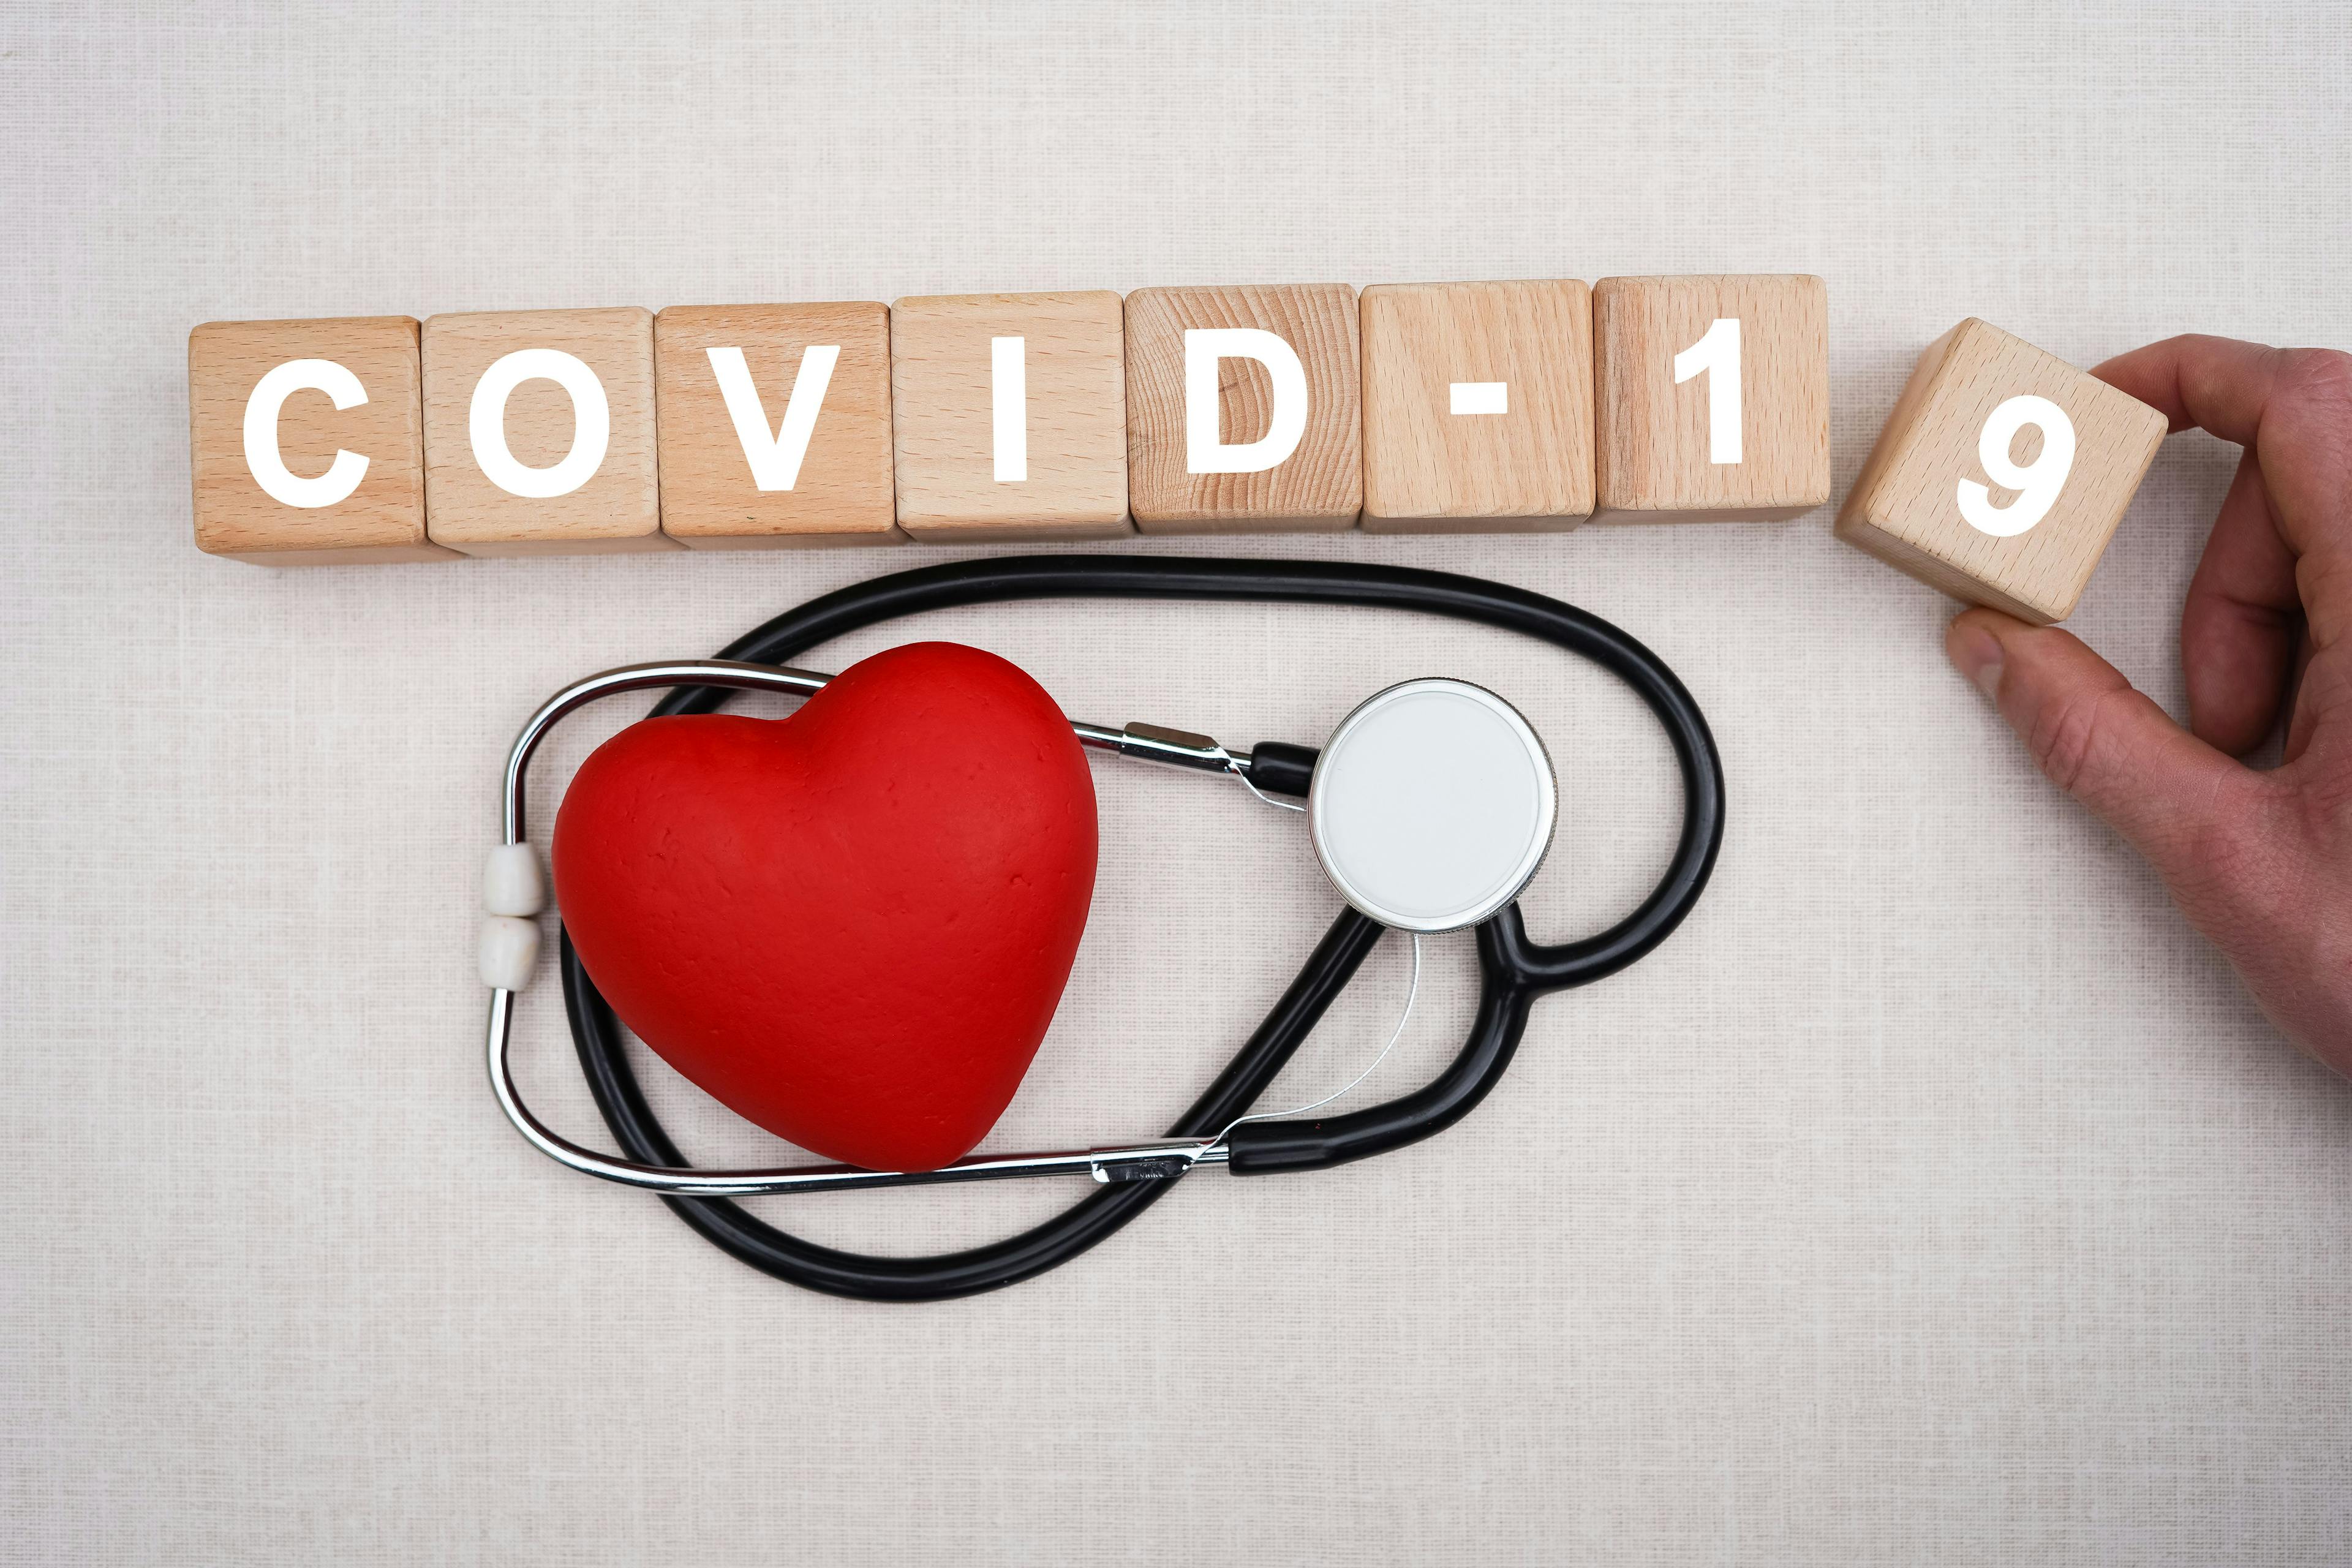 Antihypertensive Drugs Found Safe for Patients with COVID-19 in New Study